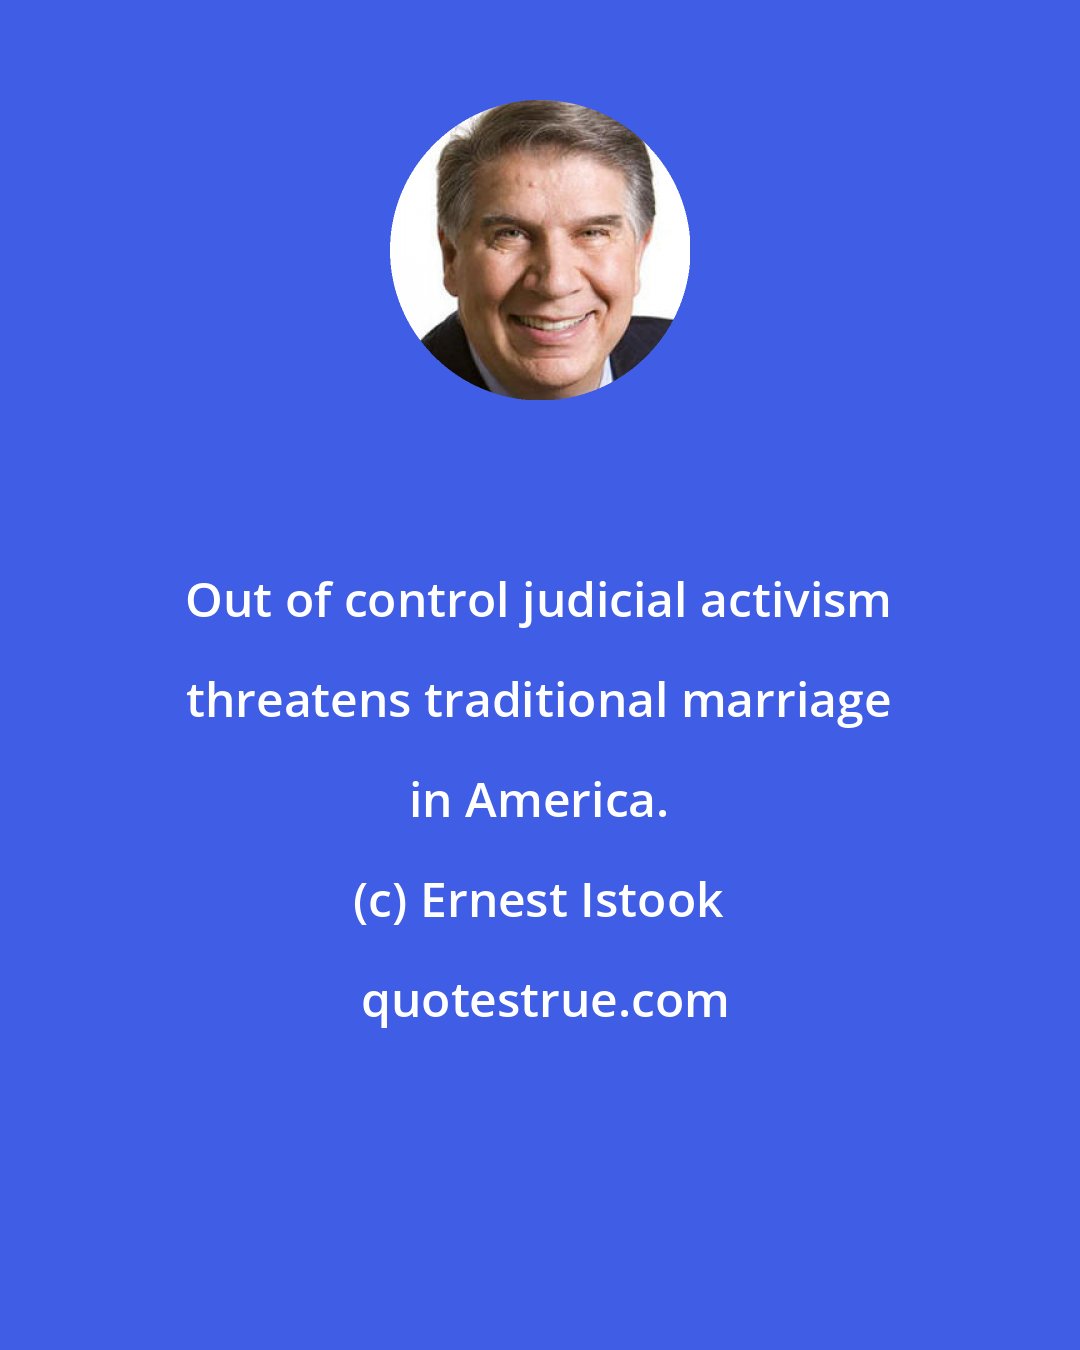 Ernest Istook: Out of control judicial activism threatens traditional marriage in America.